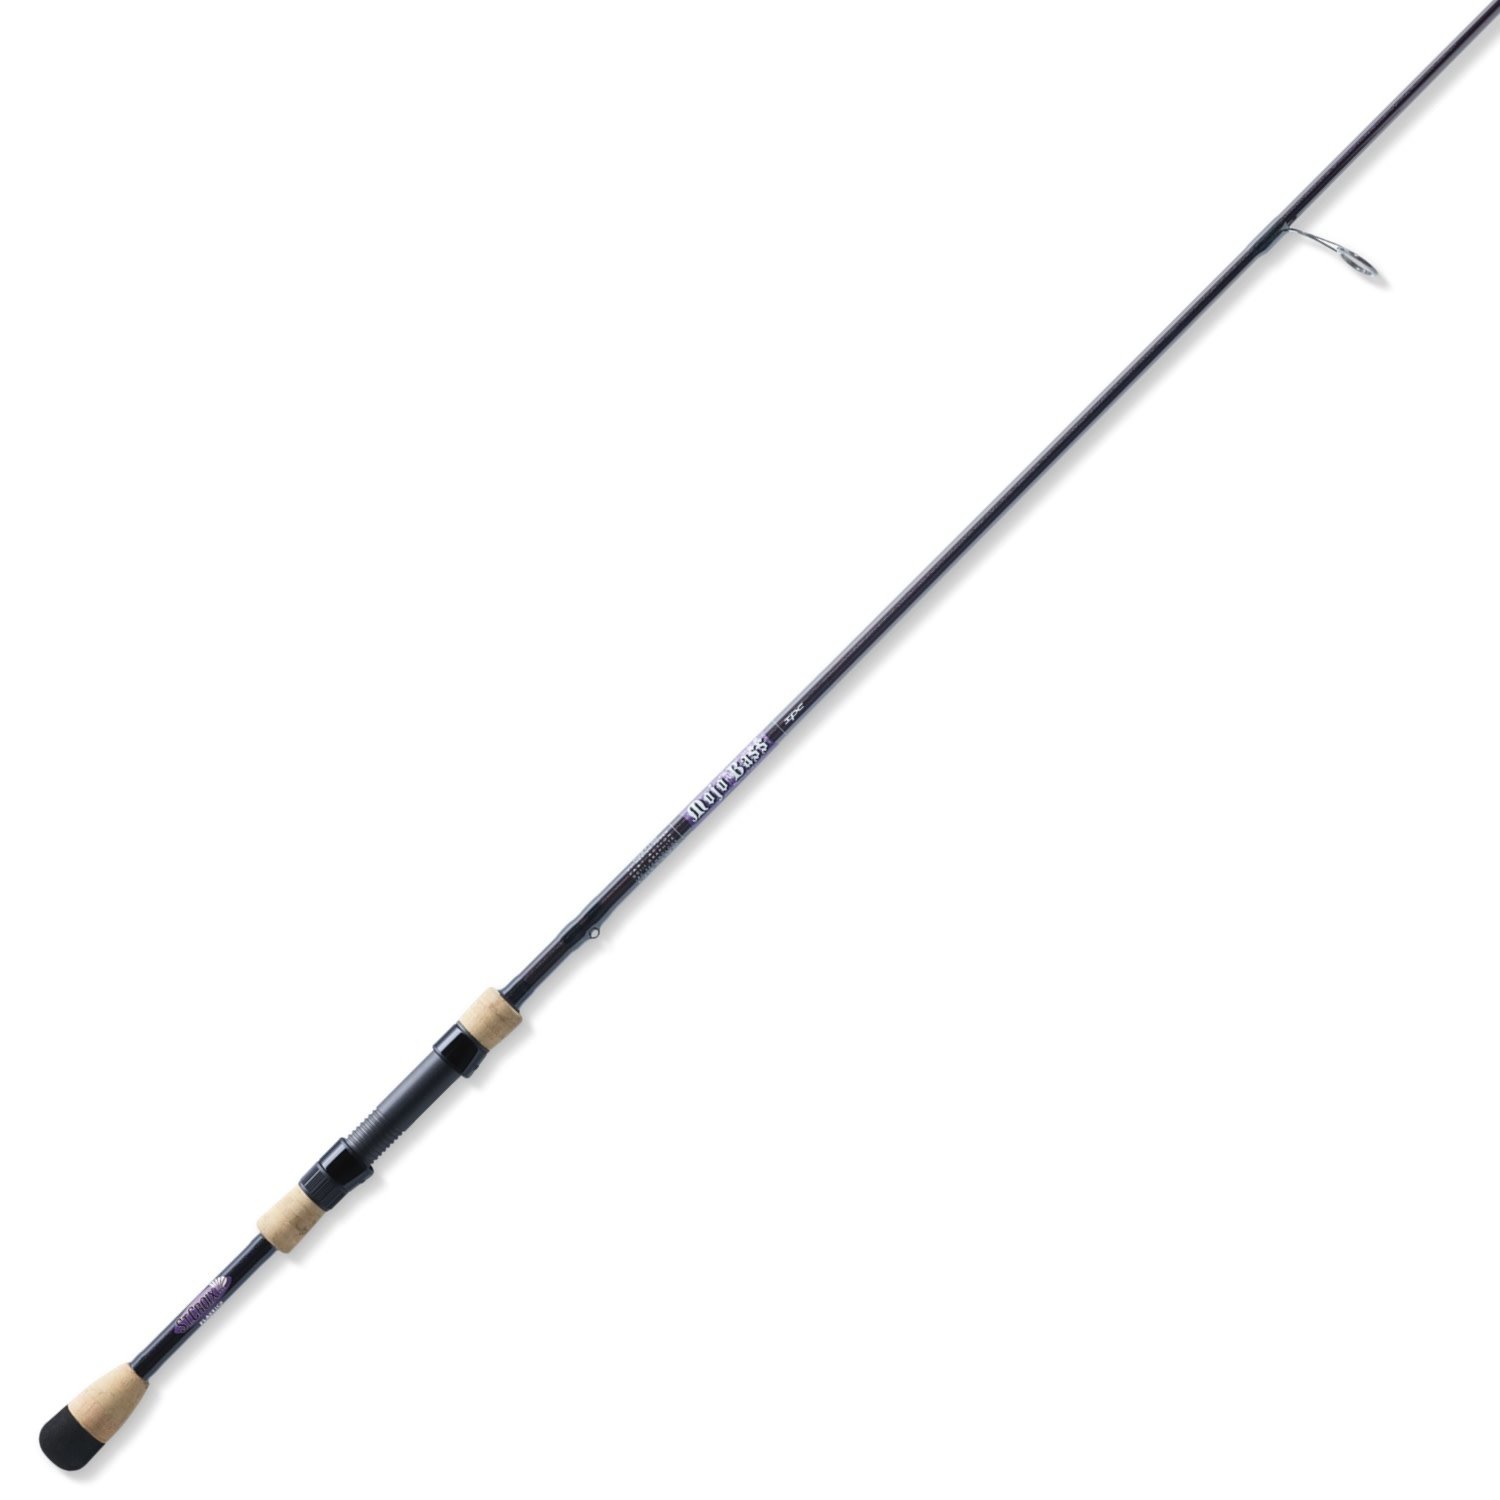 ST CROIX MOJO BASS SPINNING RODS